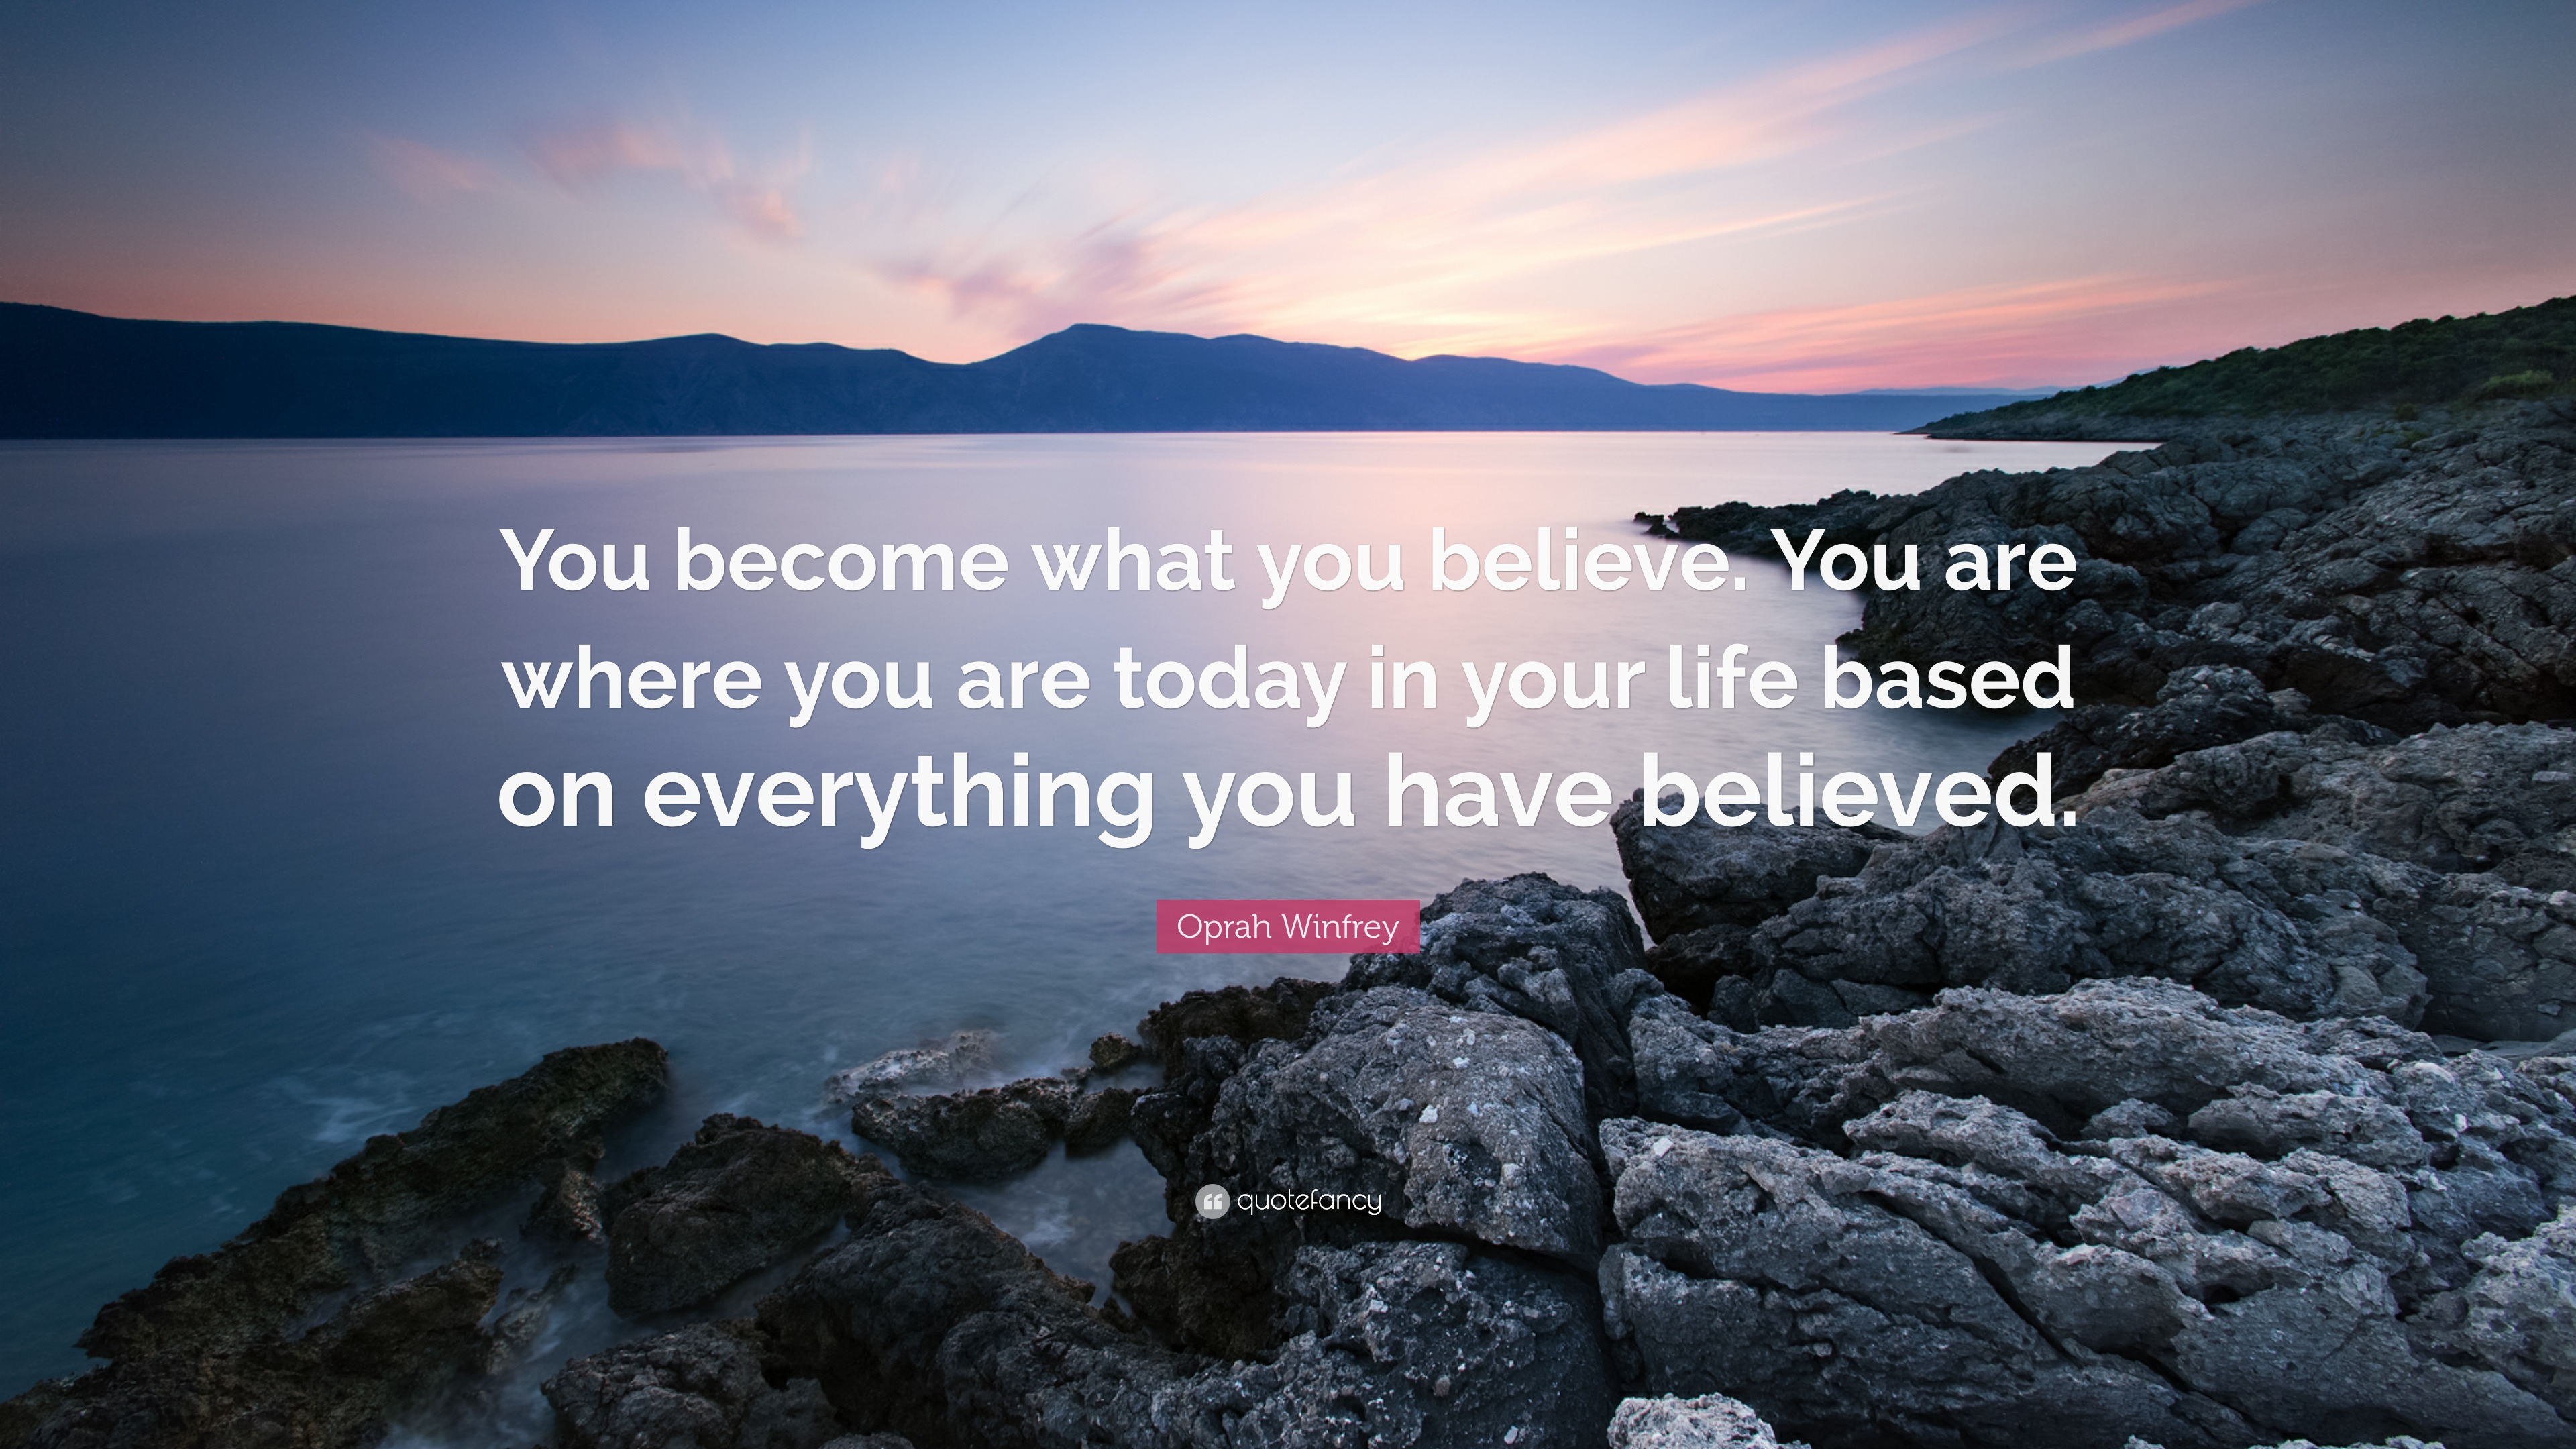 Oprah Winfrey Quote: “You become what you believe. You are where you are  today in your